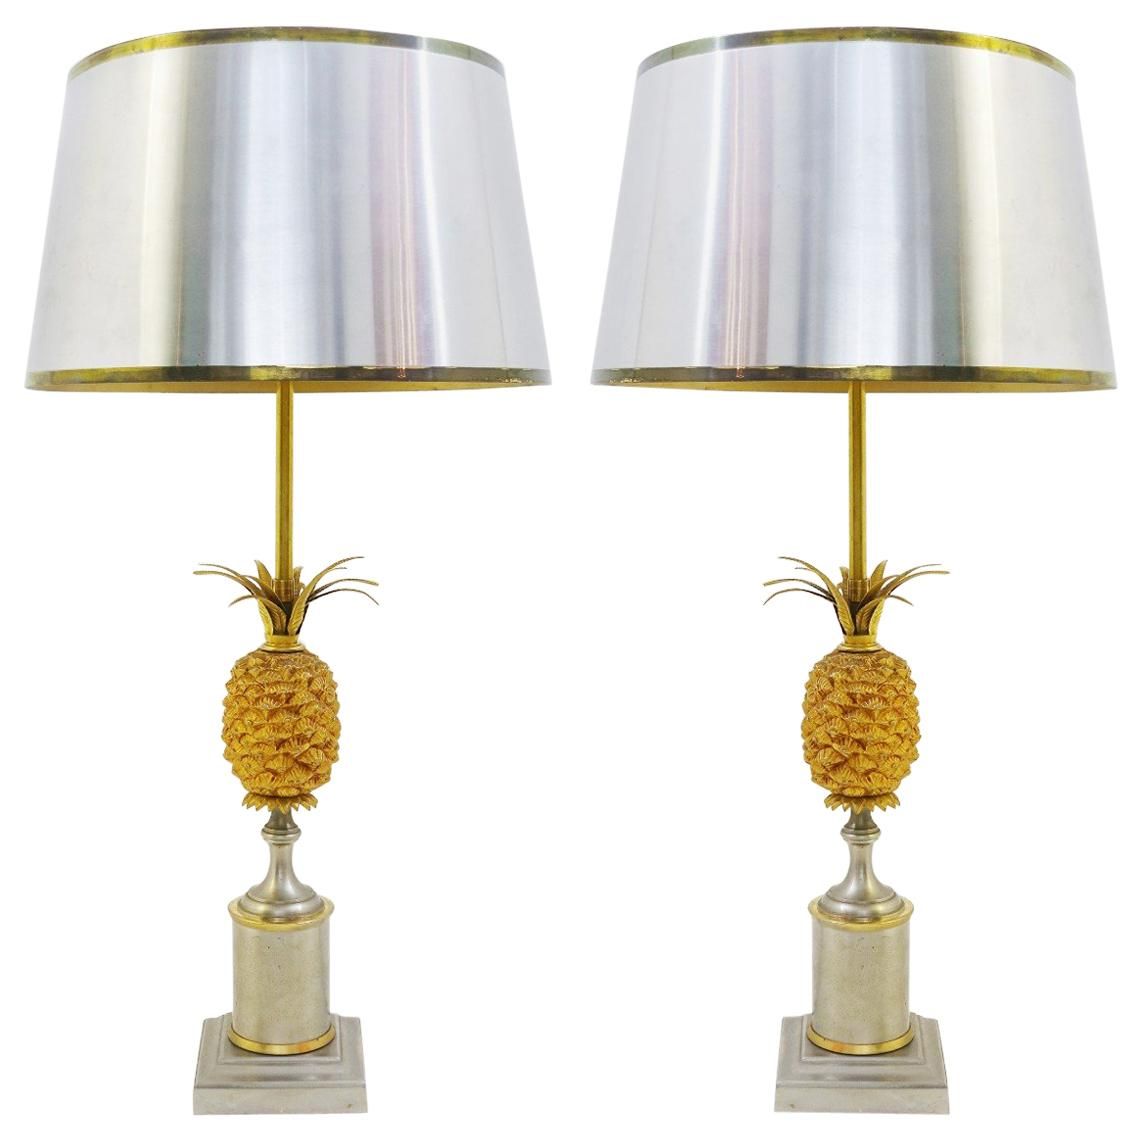 Spectacular Pineapple Style Table Lamps for Your Home Décor